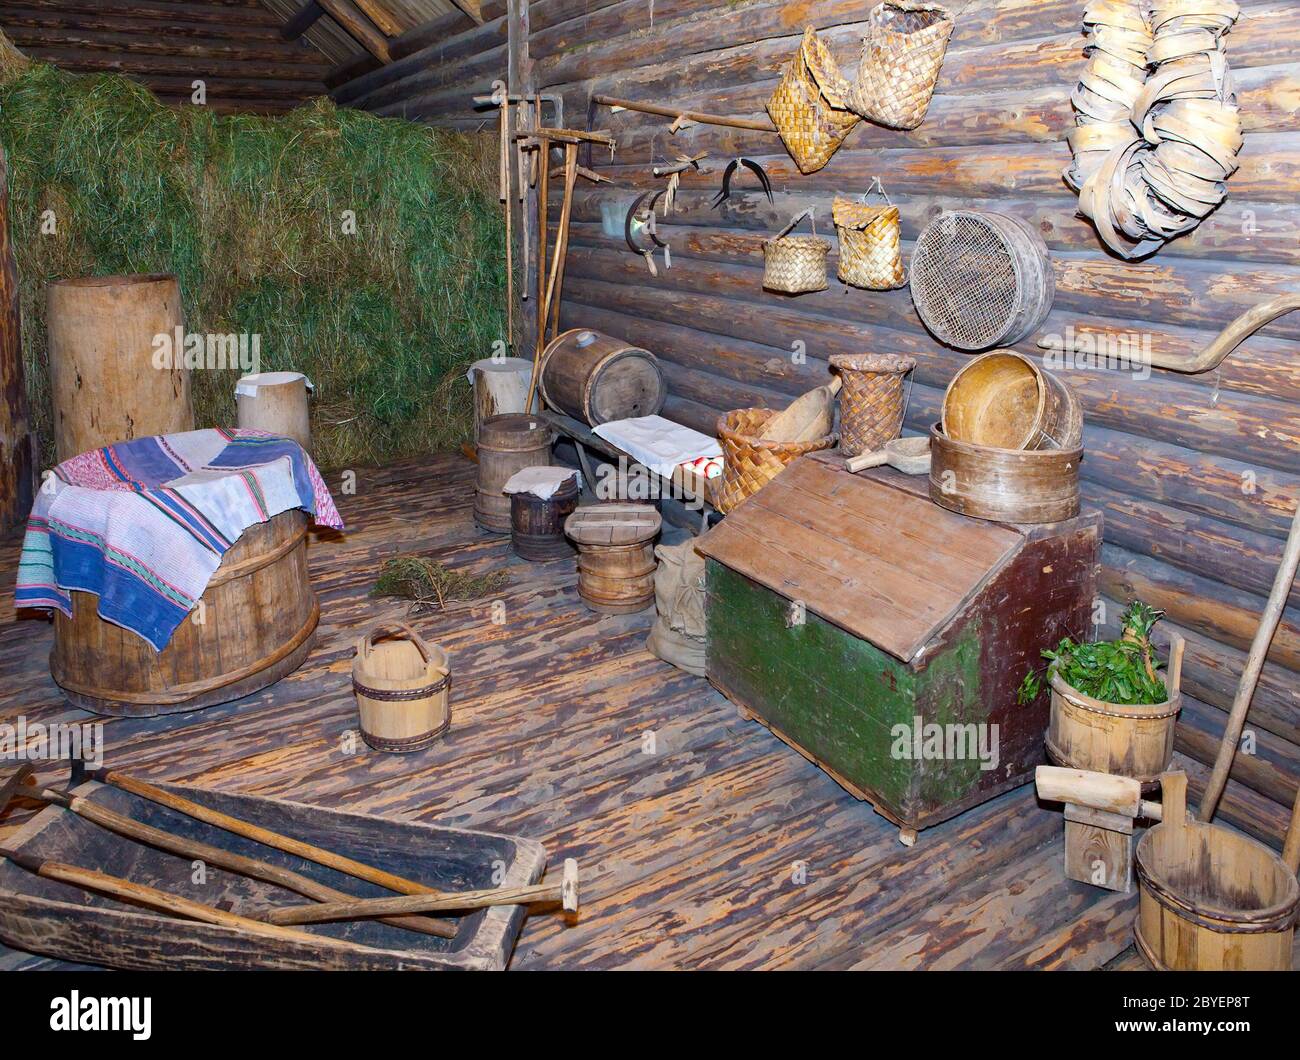 museum of  ancient wooden architecture, log hut in Stock Photo